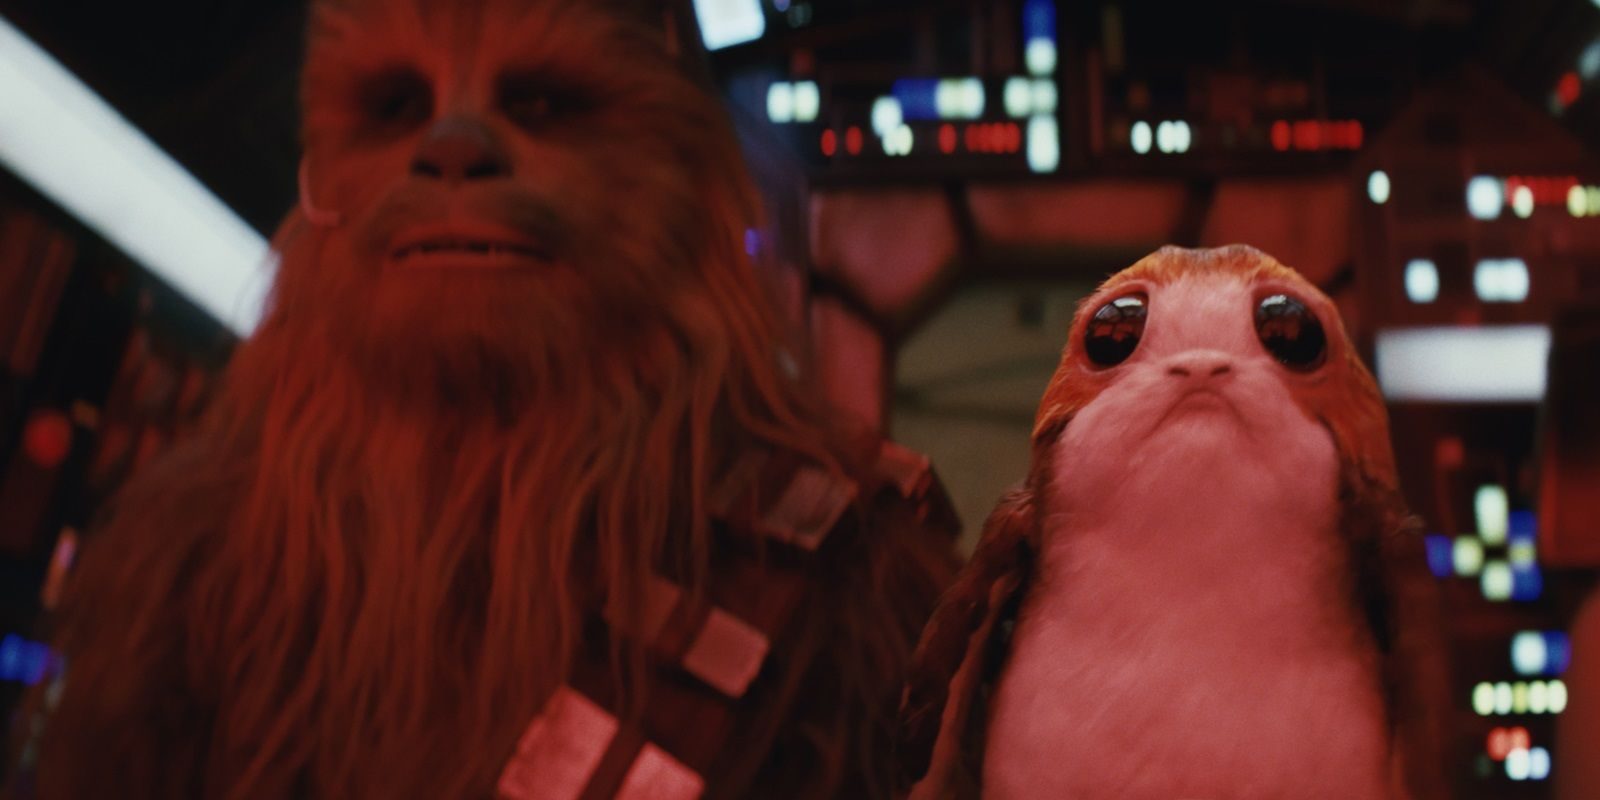 chewbacca-and-a-porg-on-the-millenium-falcon-in-star-wars-the-last-jedi-5094236